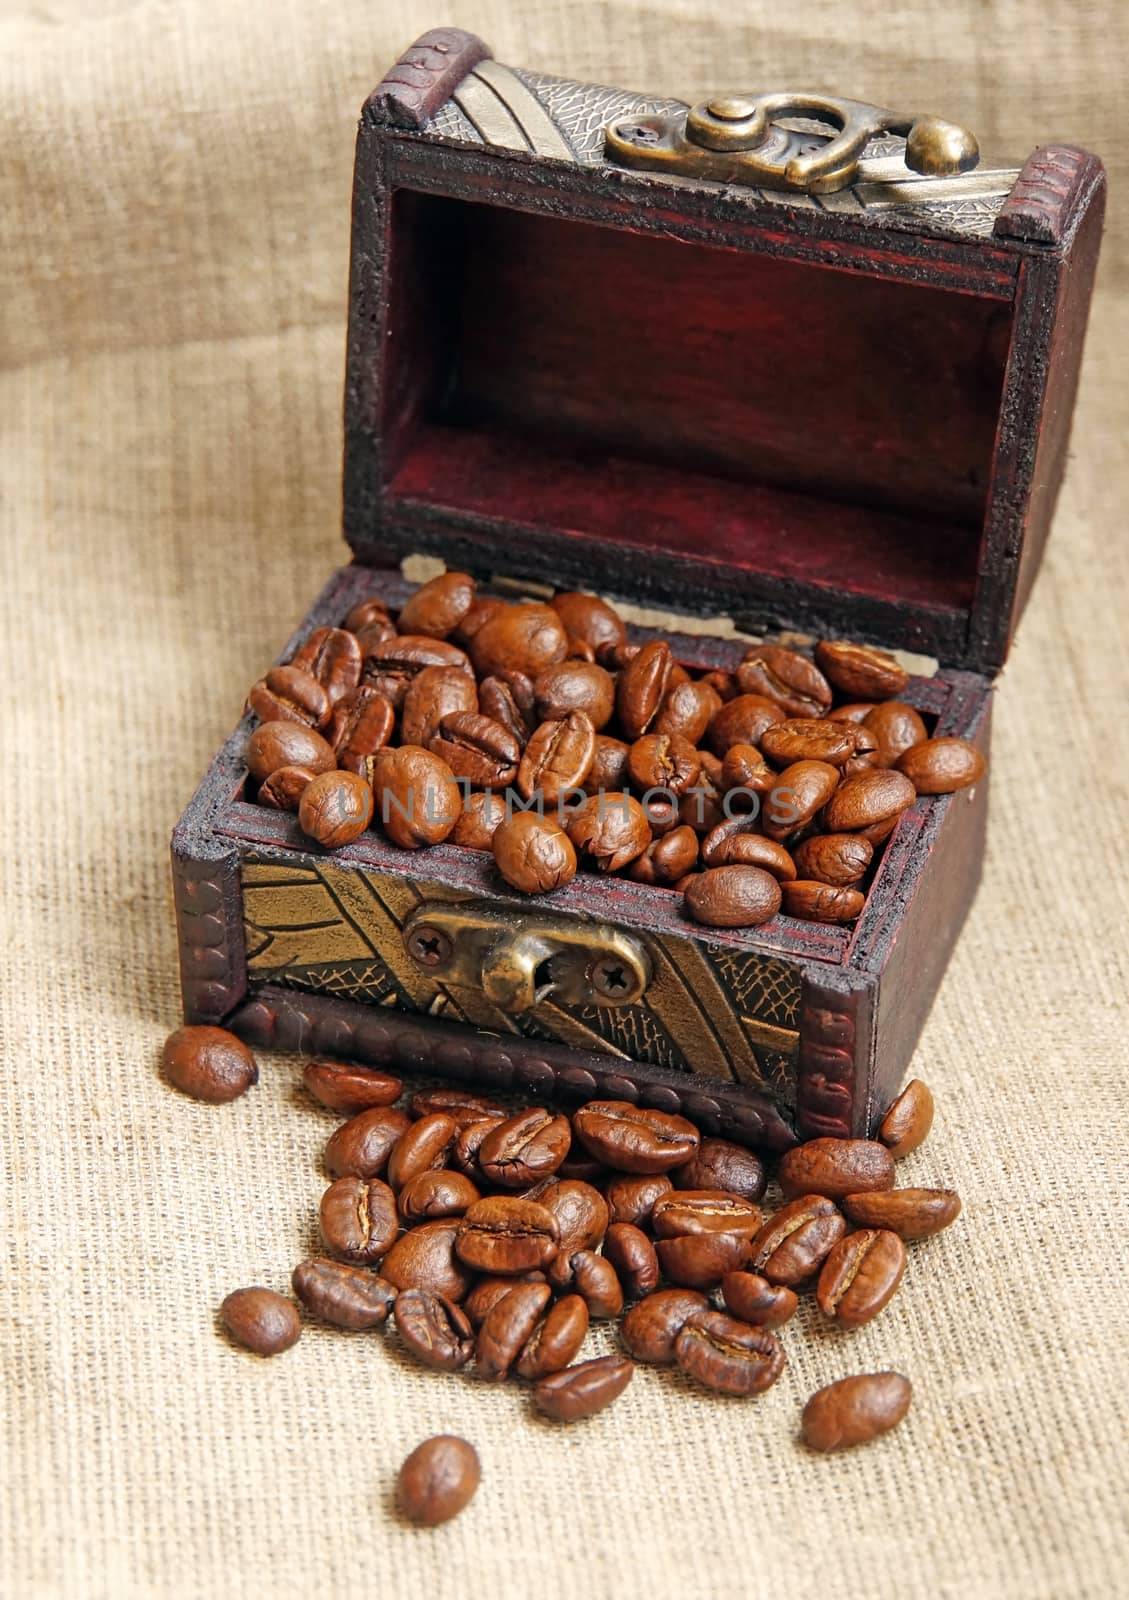 Vintage wooden box with coffee beans on a woven fabric by Chiffanna